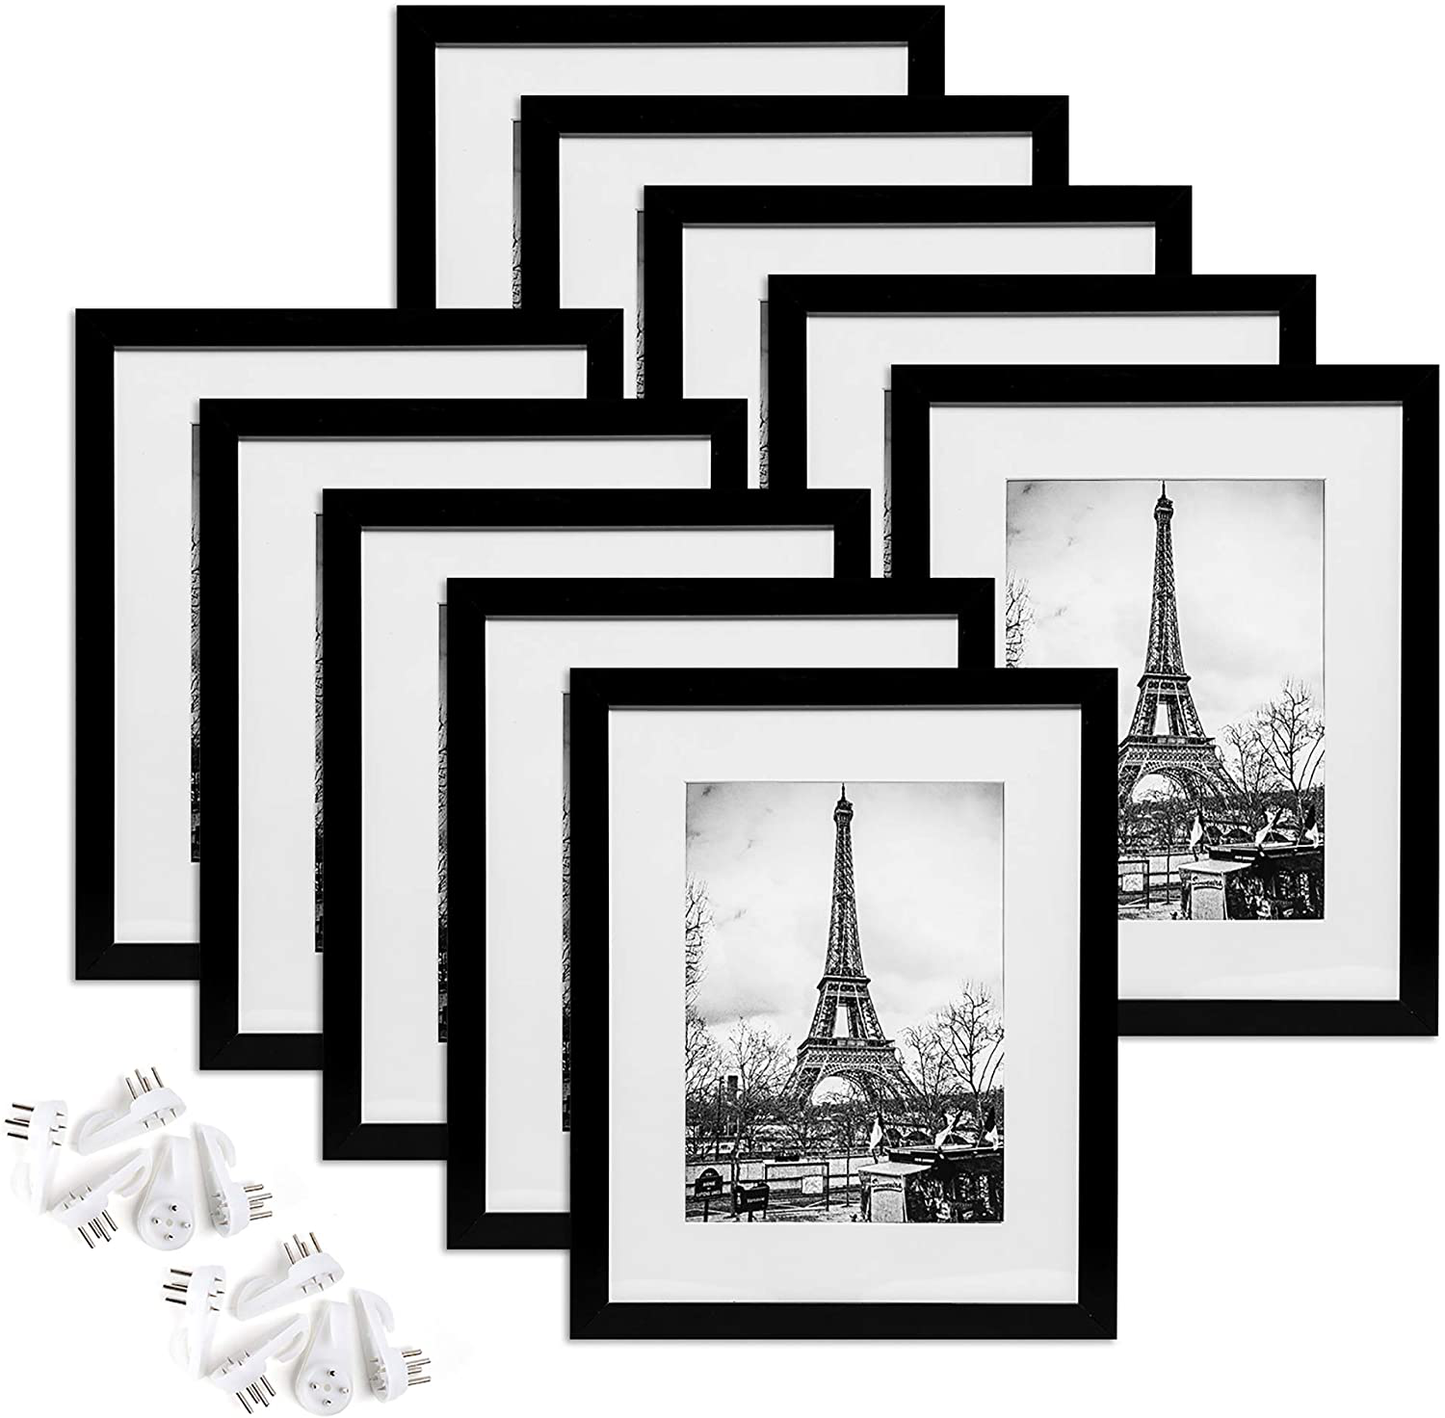 upsimples 8.5x11 Picture Frame Set of 10,Display Pictures 6x8 with Mat or 8.5x11 Without Mat,Multi Photo Frames Collage for Wall or Tabletop Display,Black